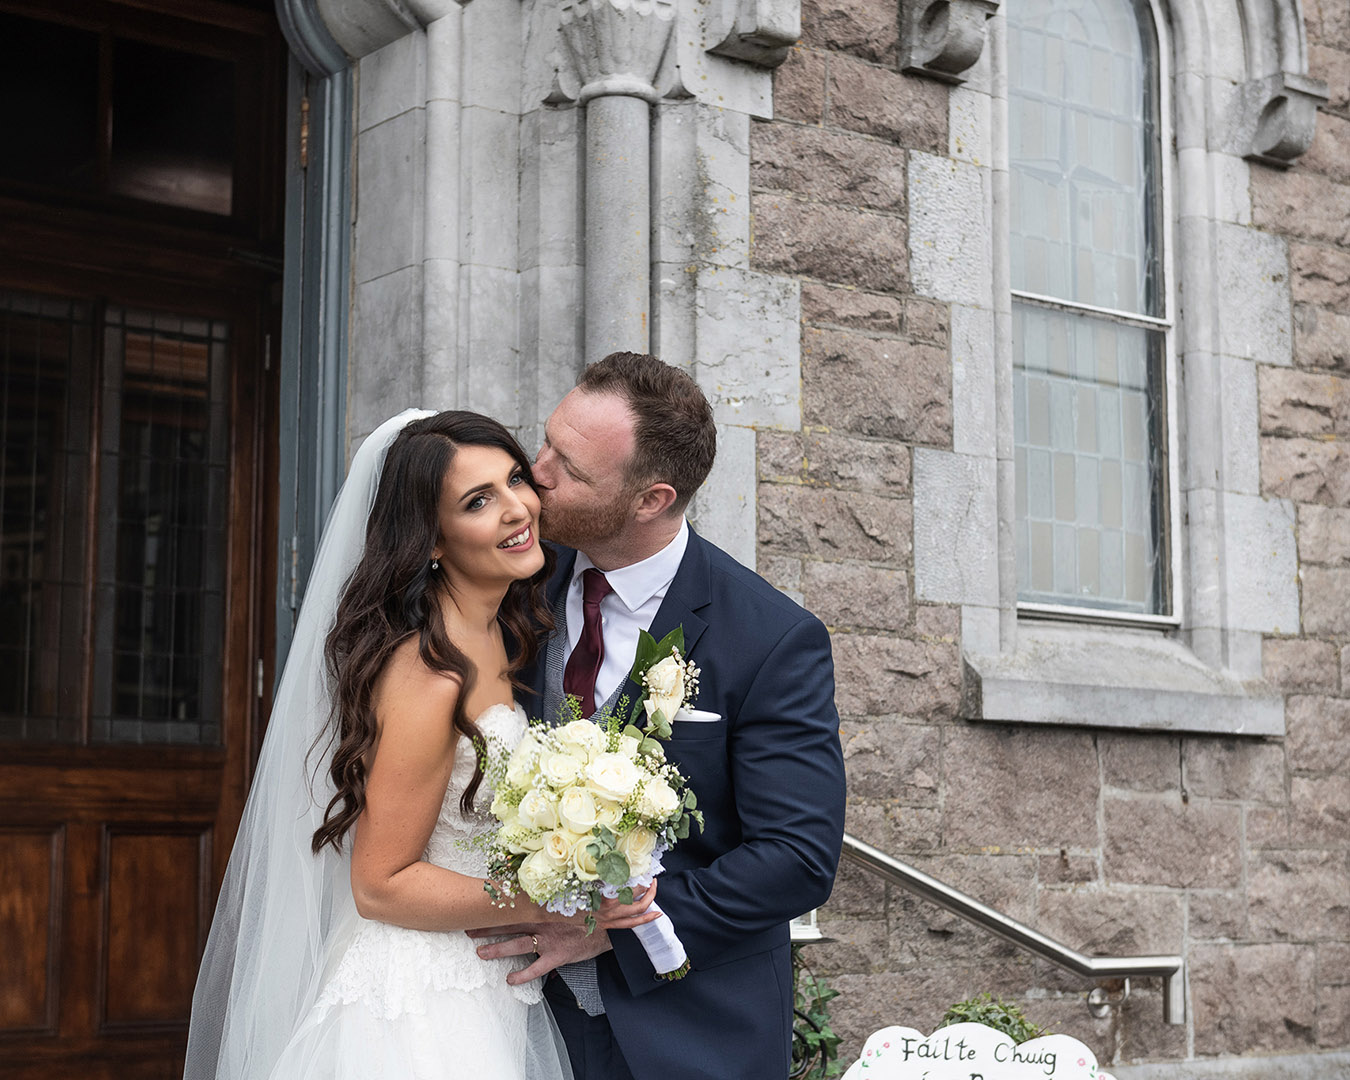 Married at the Claddagh church in Galway, planning your stress free day and taking photos at the Claddagh in Galway